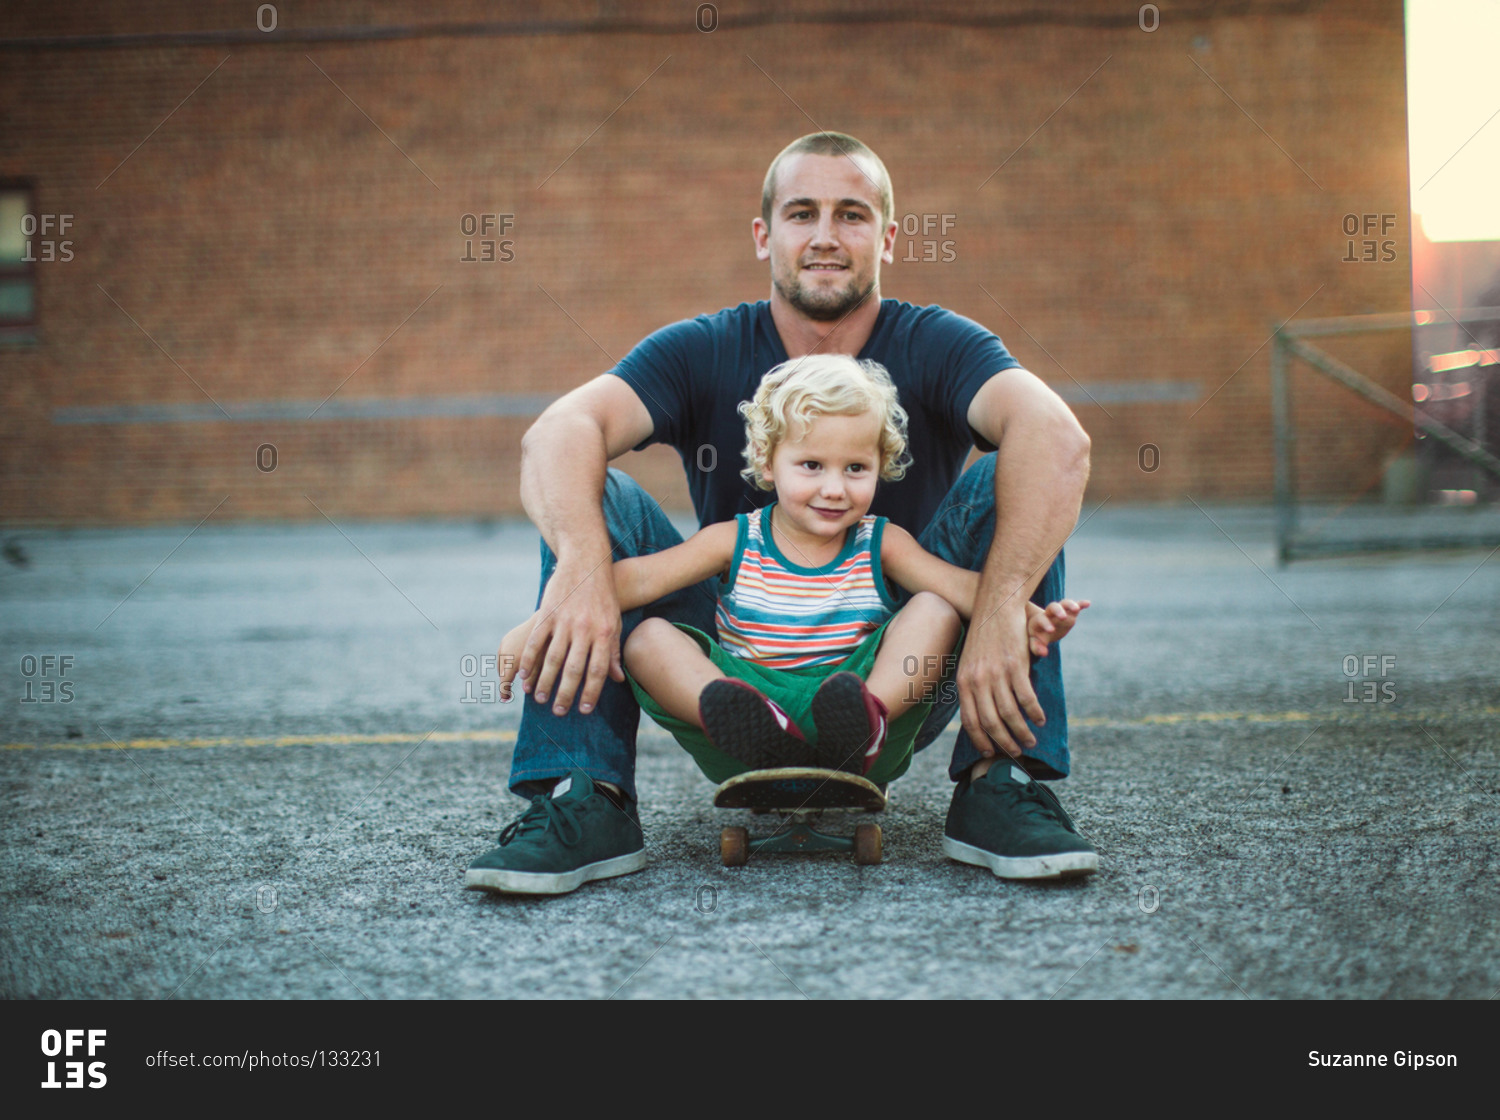 Young man sitting with boy on a skateboard